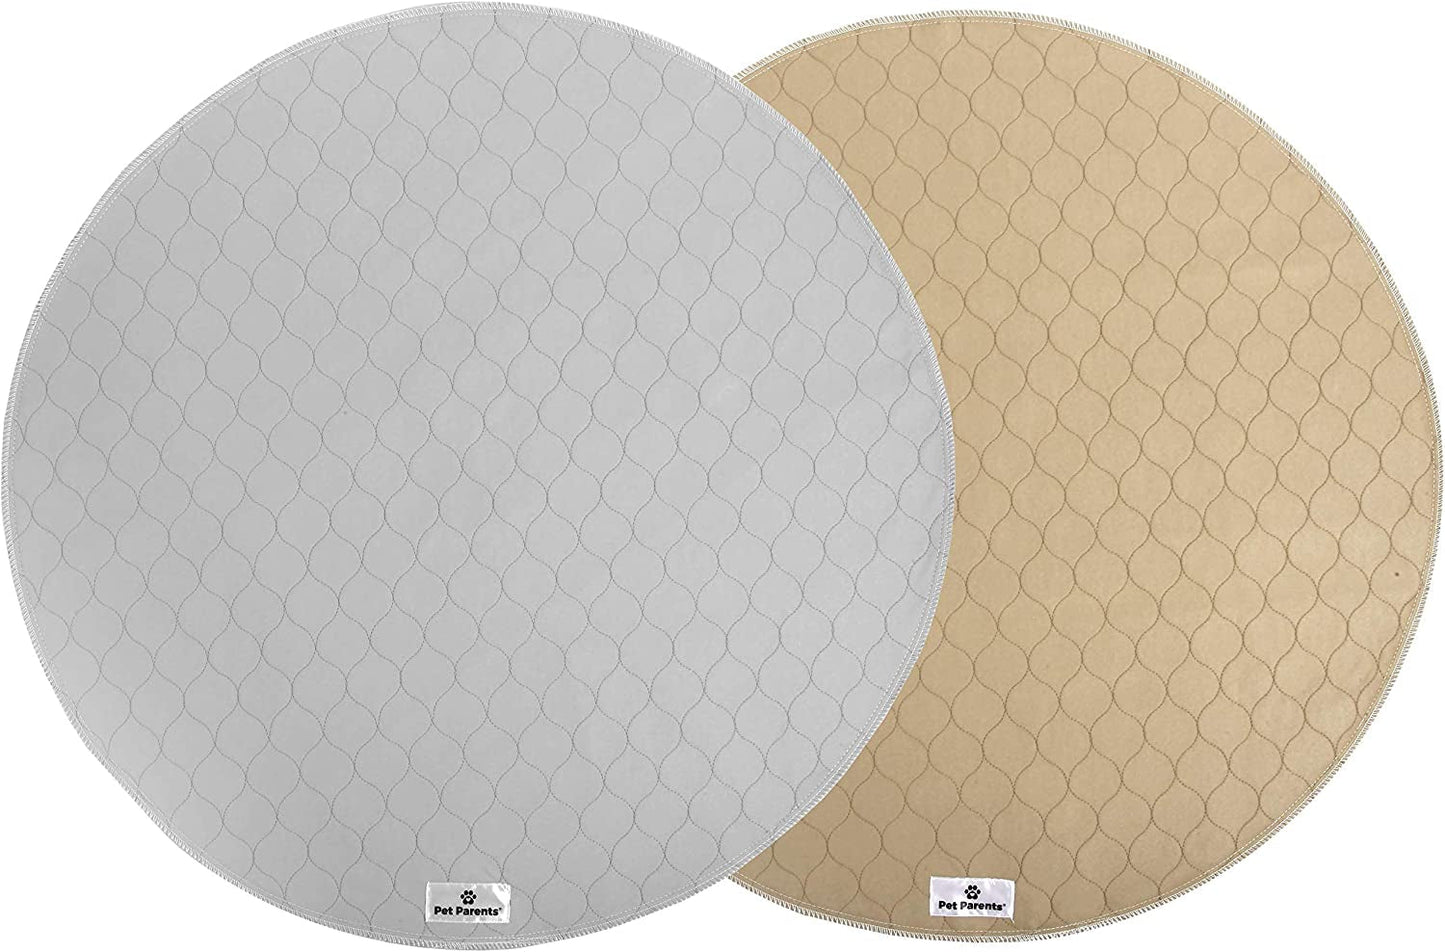 Washable round Whelping Pads (2Pack) of 36" Circle Premium Pee Pads for Dogs, Waterproof Dog Pee Pads, Circle Reusable Dog Training Pads, & Pet Pee Pads! Modern Puppy Pads! -1 Tan & 1 Grey - PETGS